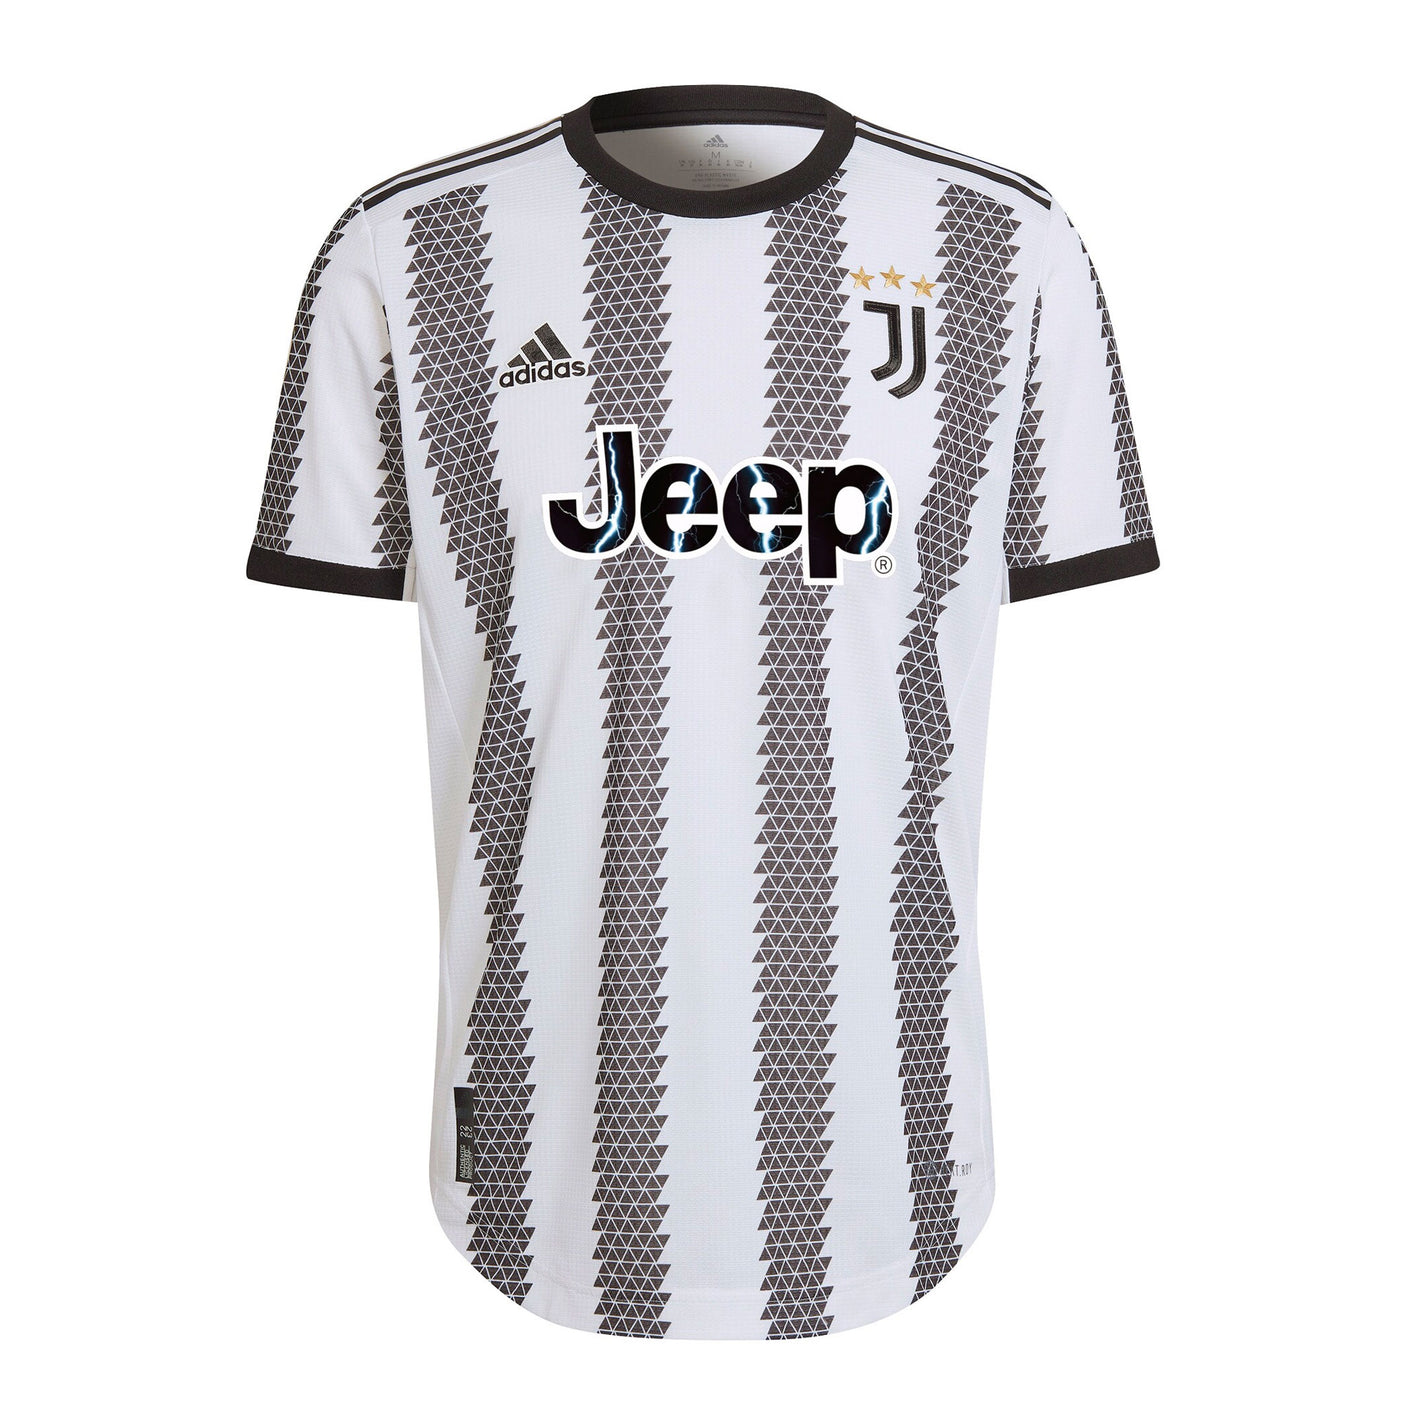 adidas Men's Juventus 2022/23 Authentic Home Jersey White/Black Front